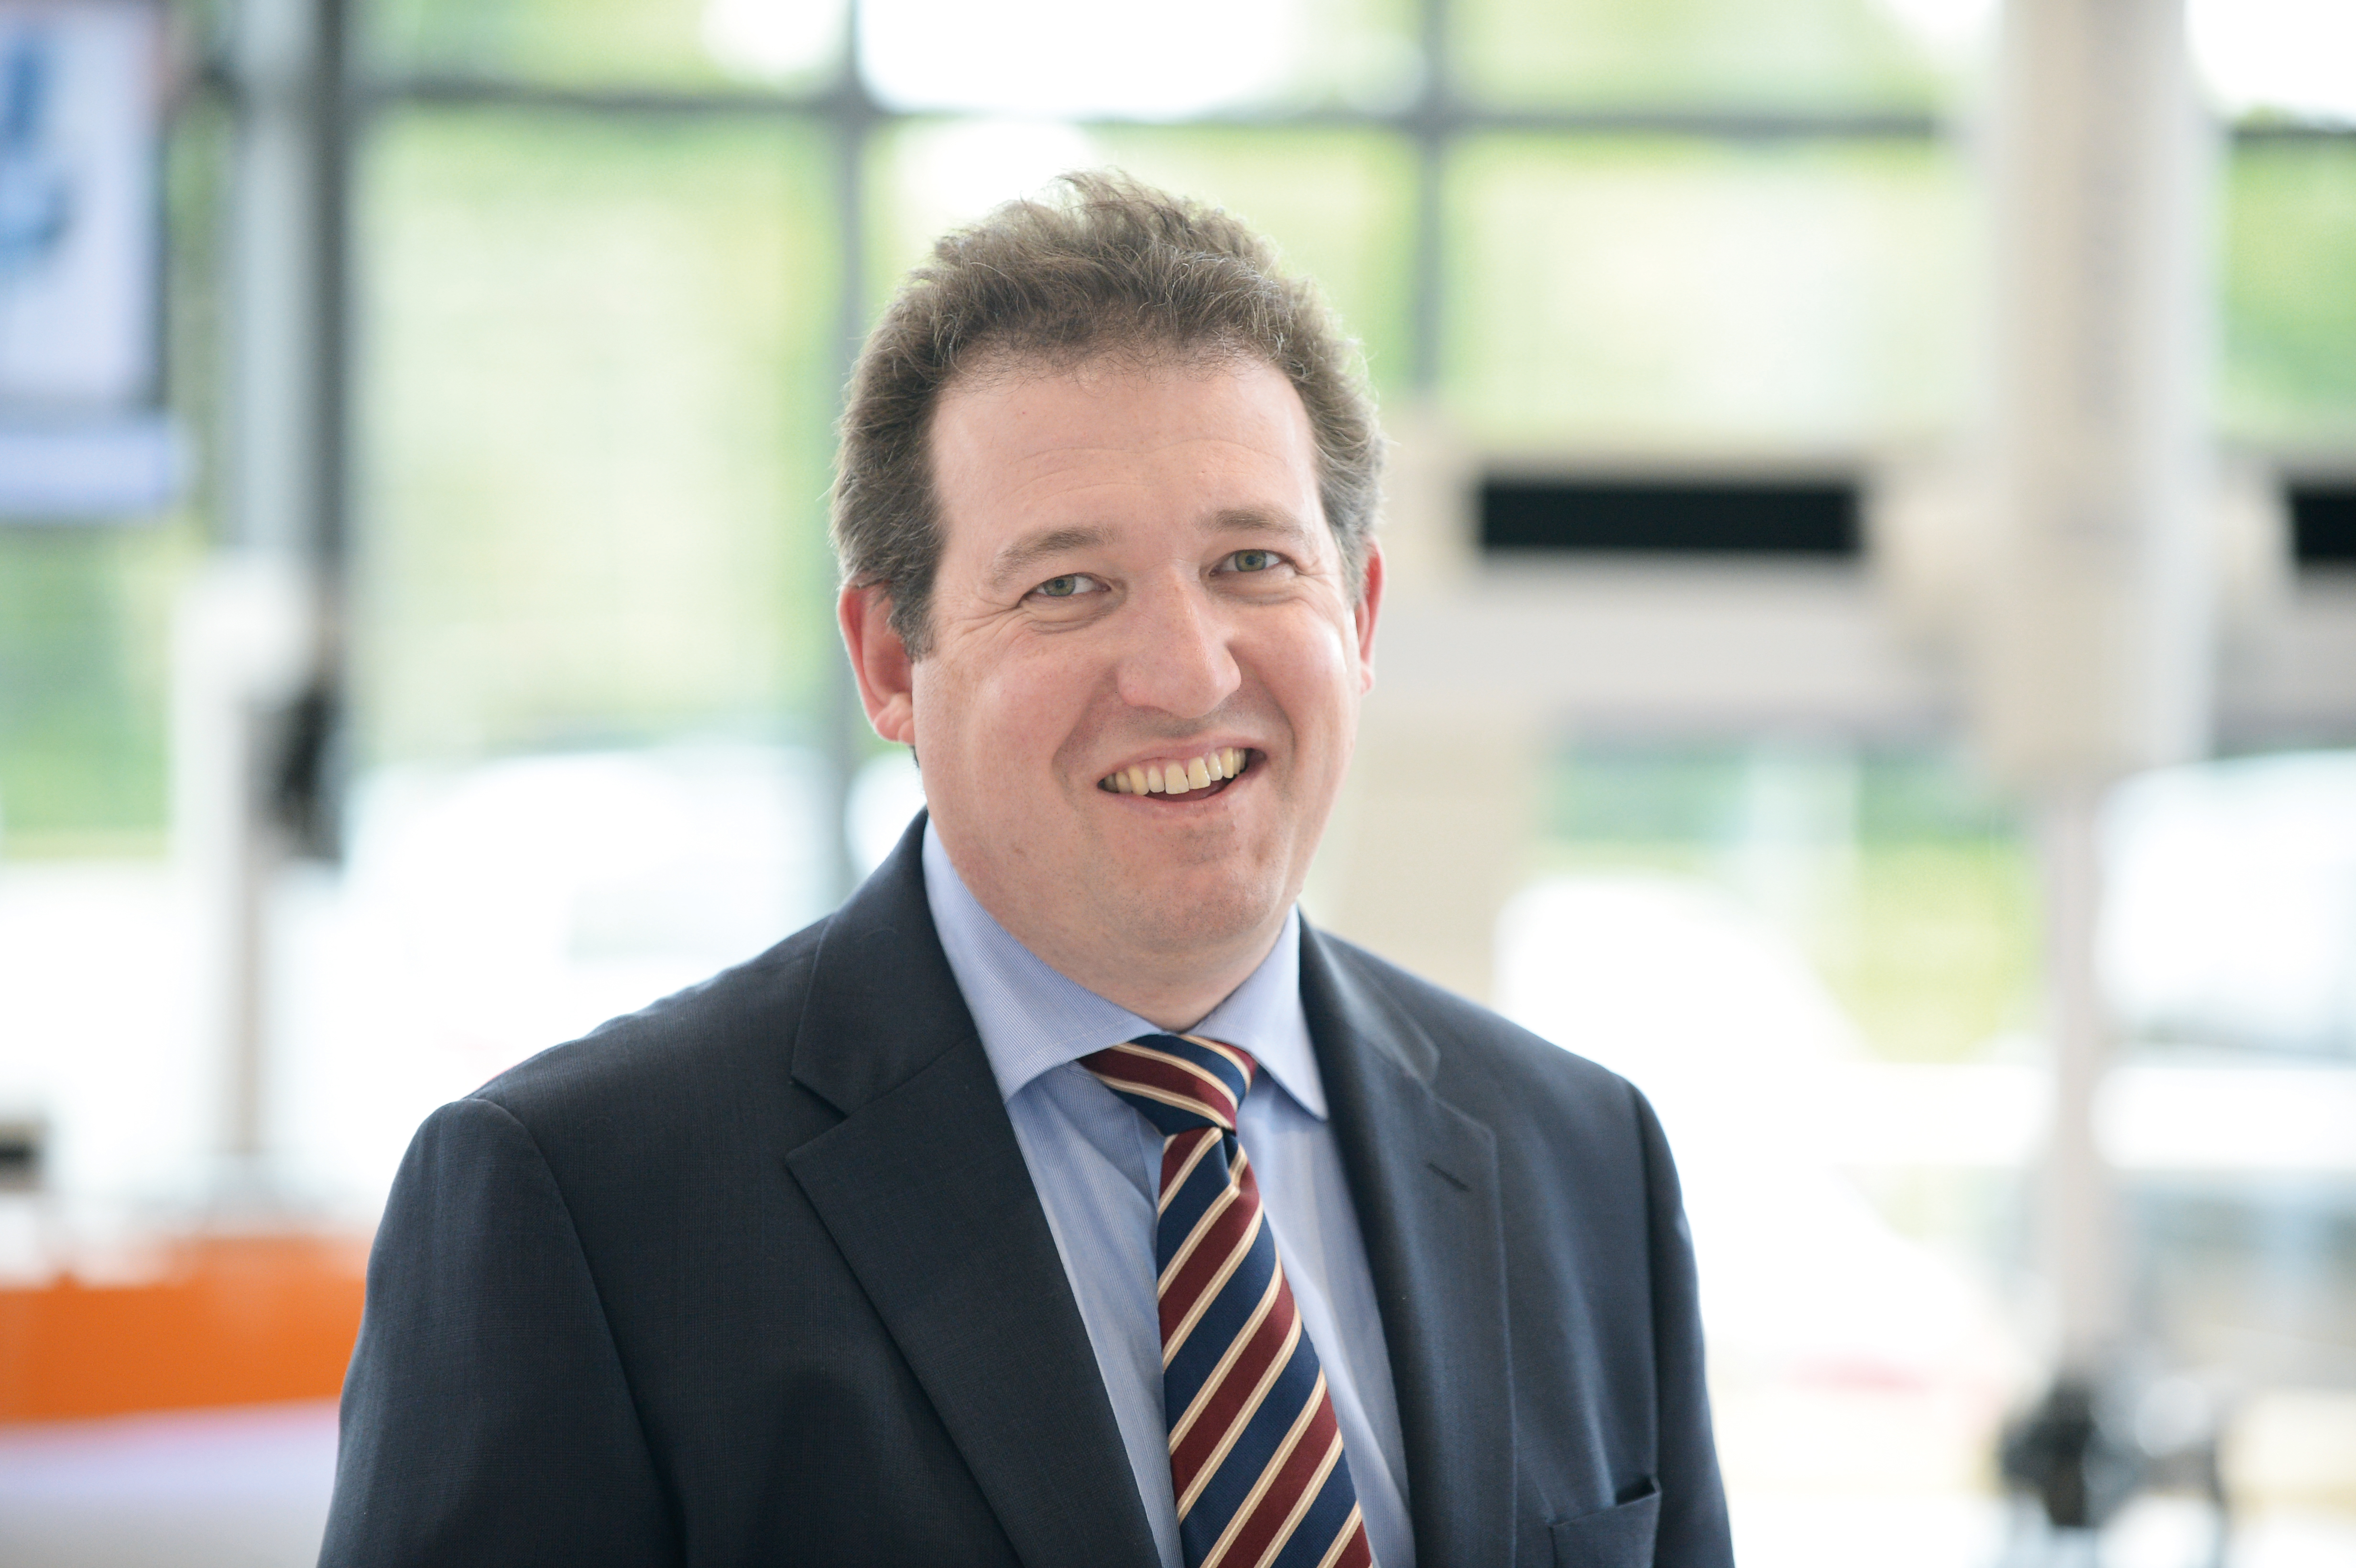 Renishaw senior manager, Stewart Lane, was appointed to the CECIMO board in 2015.